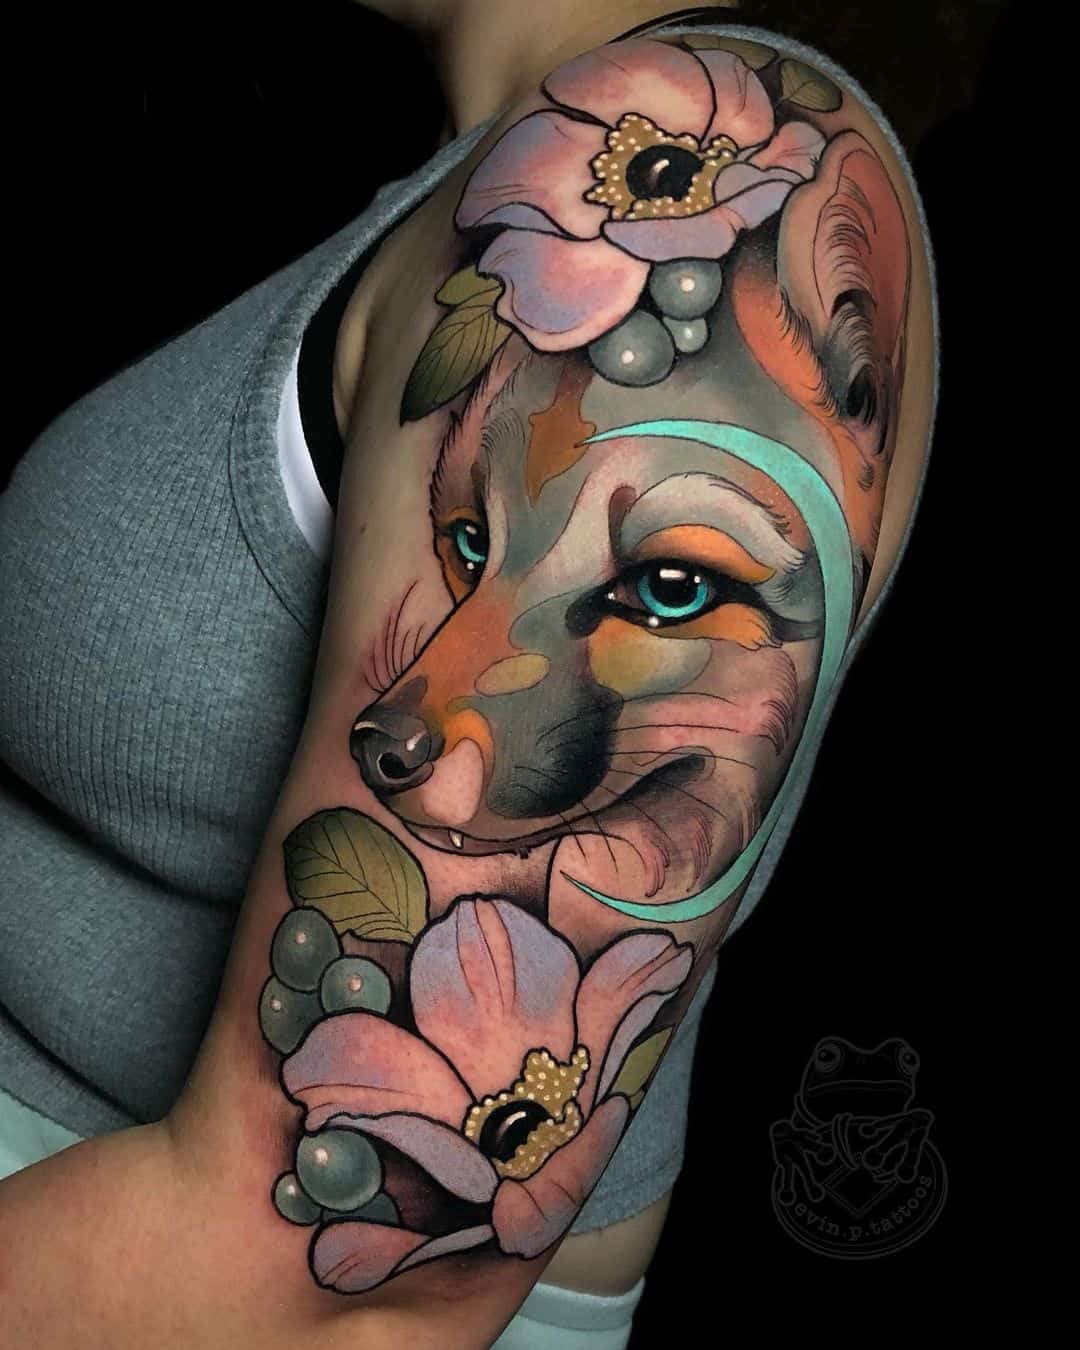 30+ Fox Tattoo Design Ideas: Symbolism and Meaning | Fox tattoo men, Fox  tattoo design, Fox tattoo